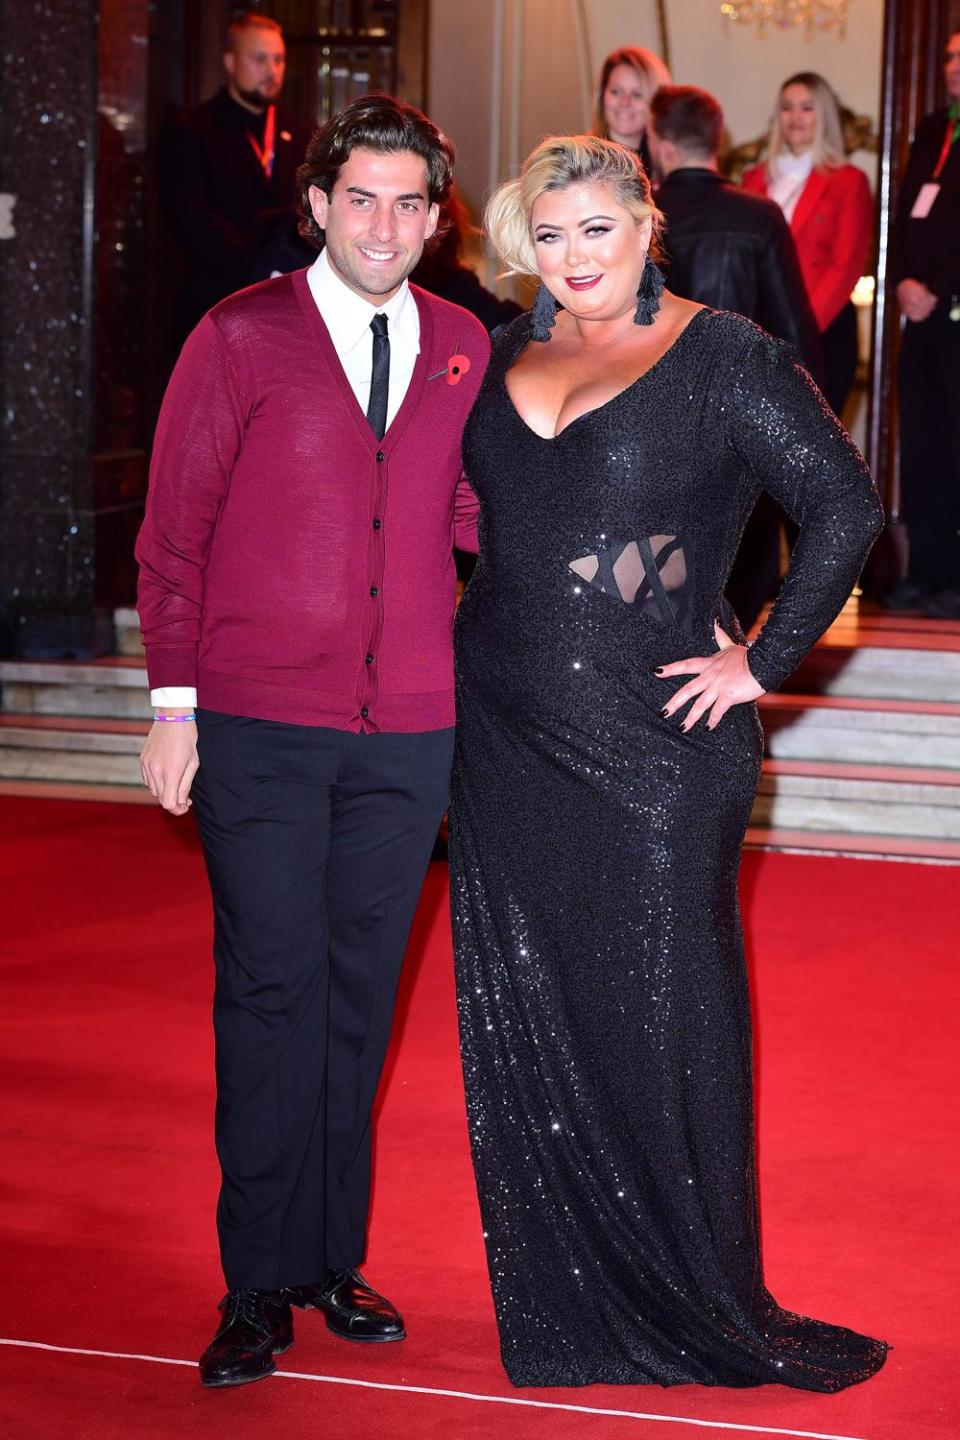 Romance: Gemma Collins and James Argent's relationship has been under the spotlight in the show (Ian West/PA Wire)